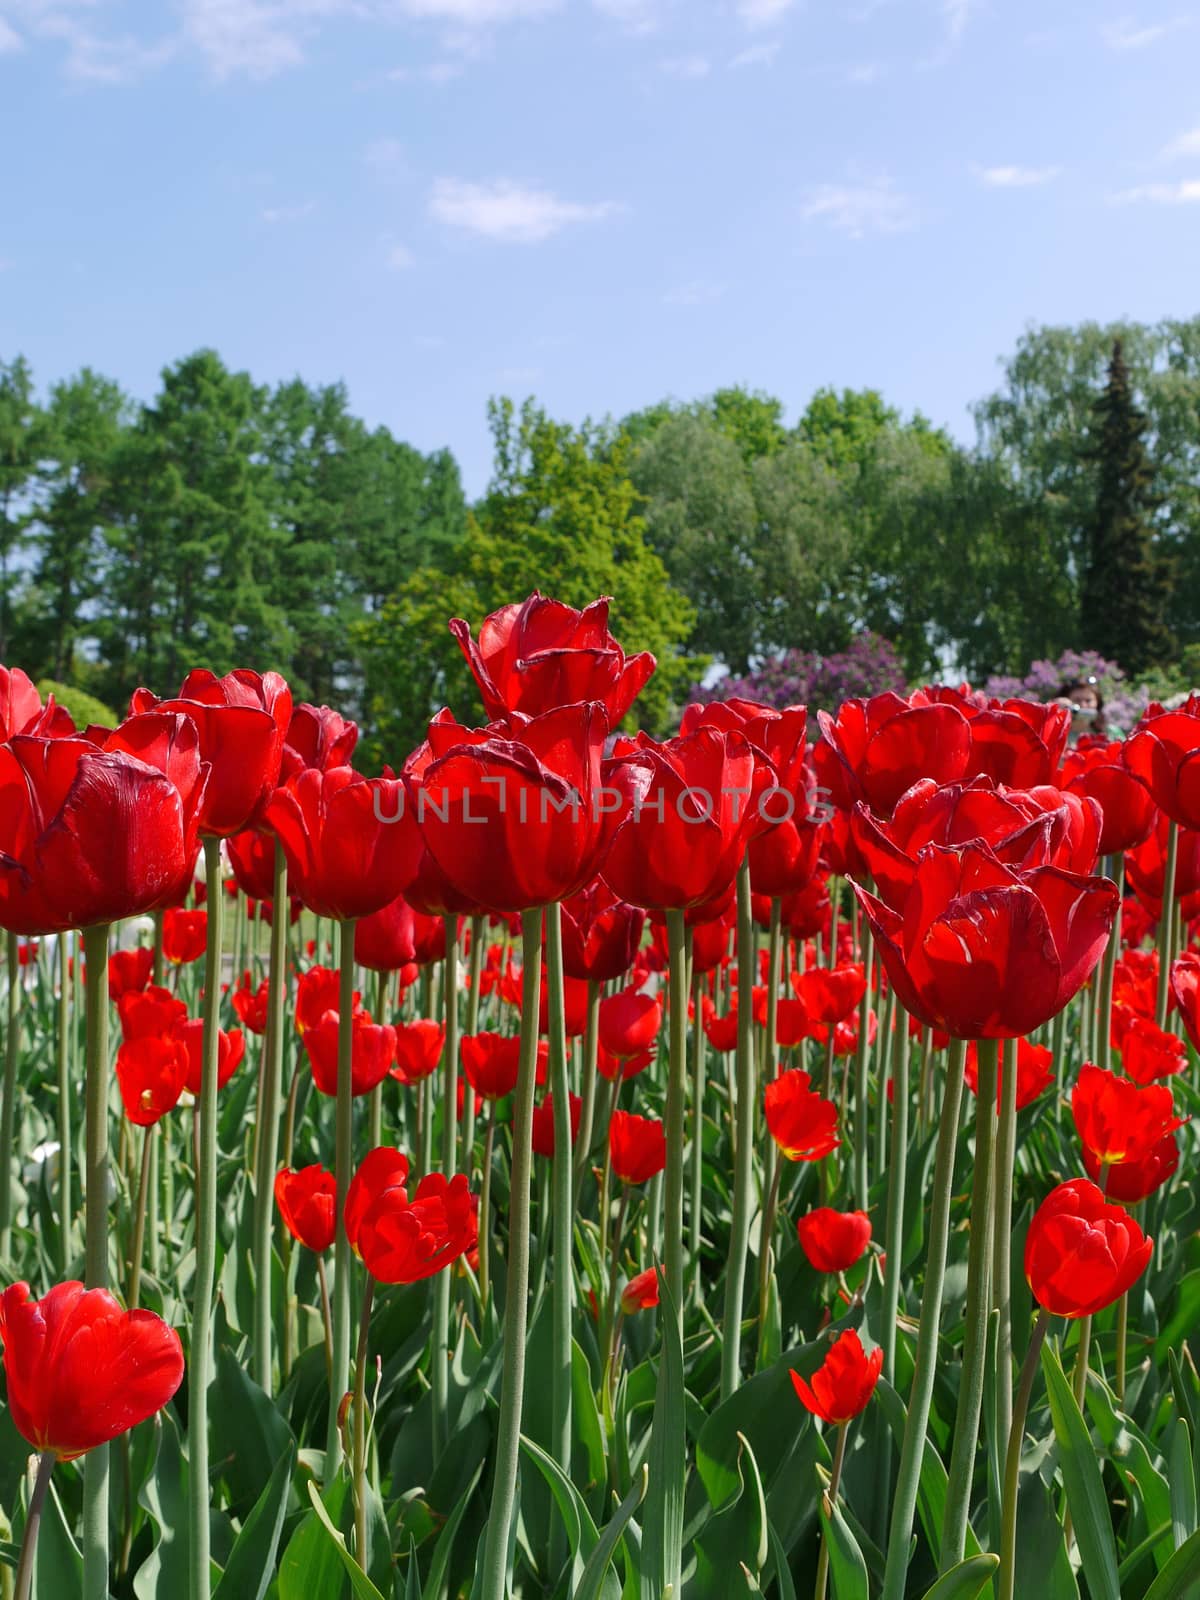 a beautiful palisade of red tulips with green stems against the background of the tops of trees and the blue sky by Adamchuk